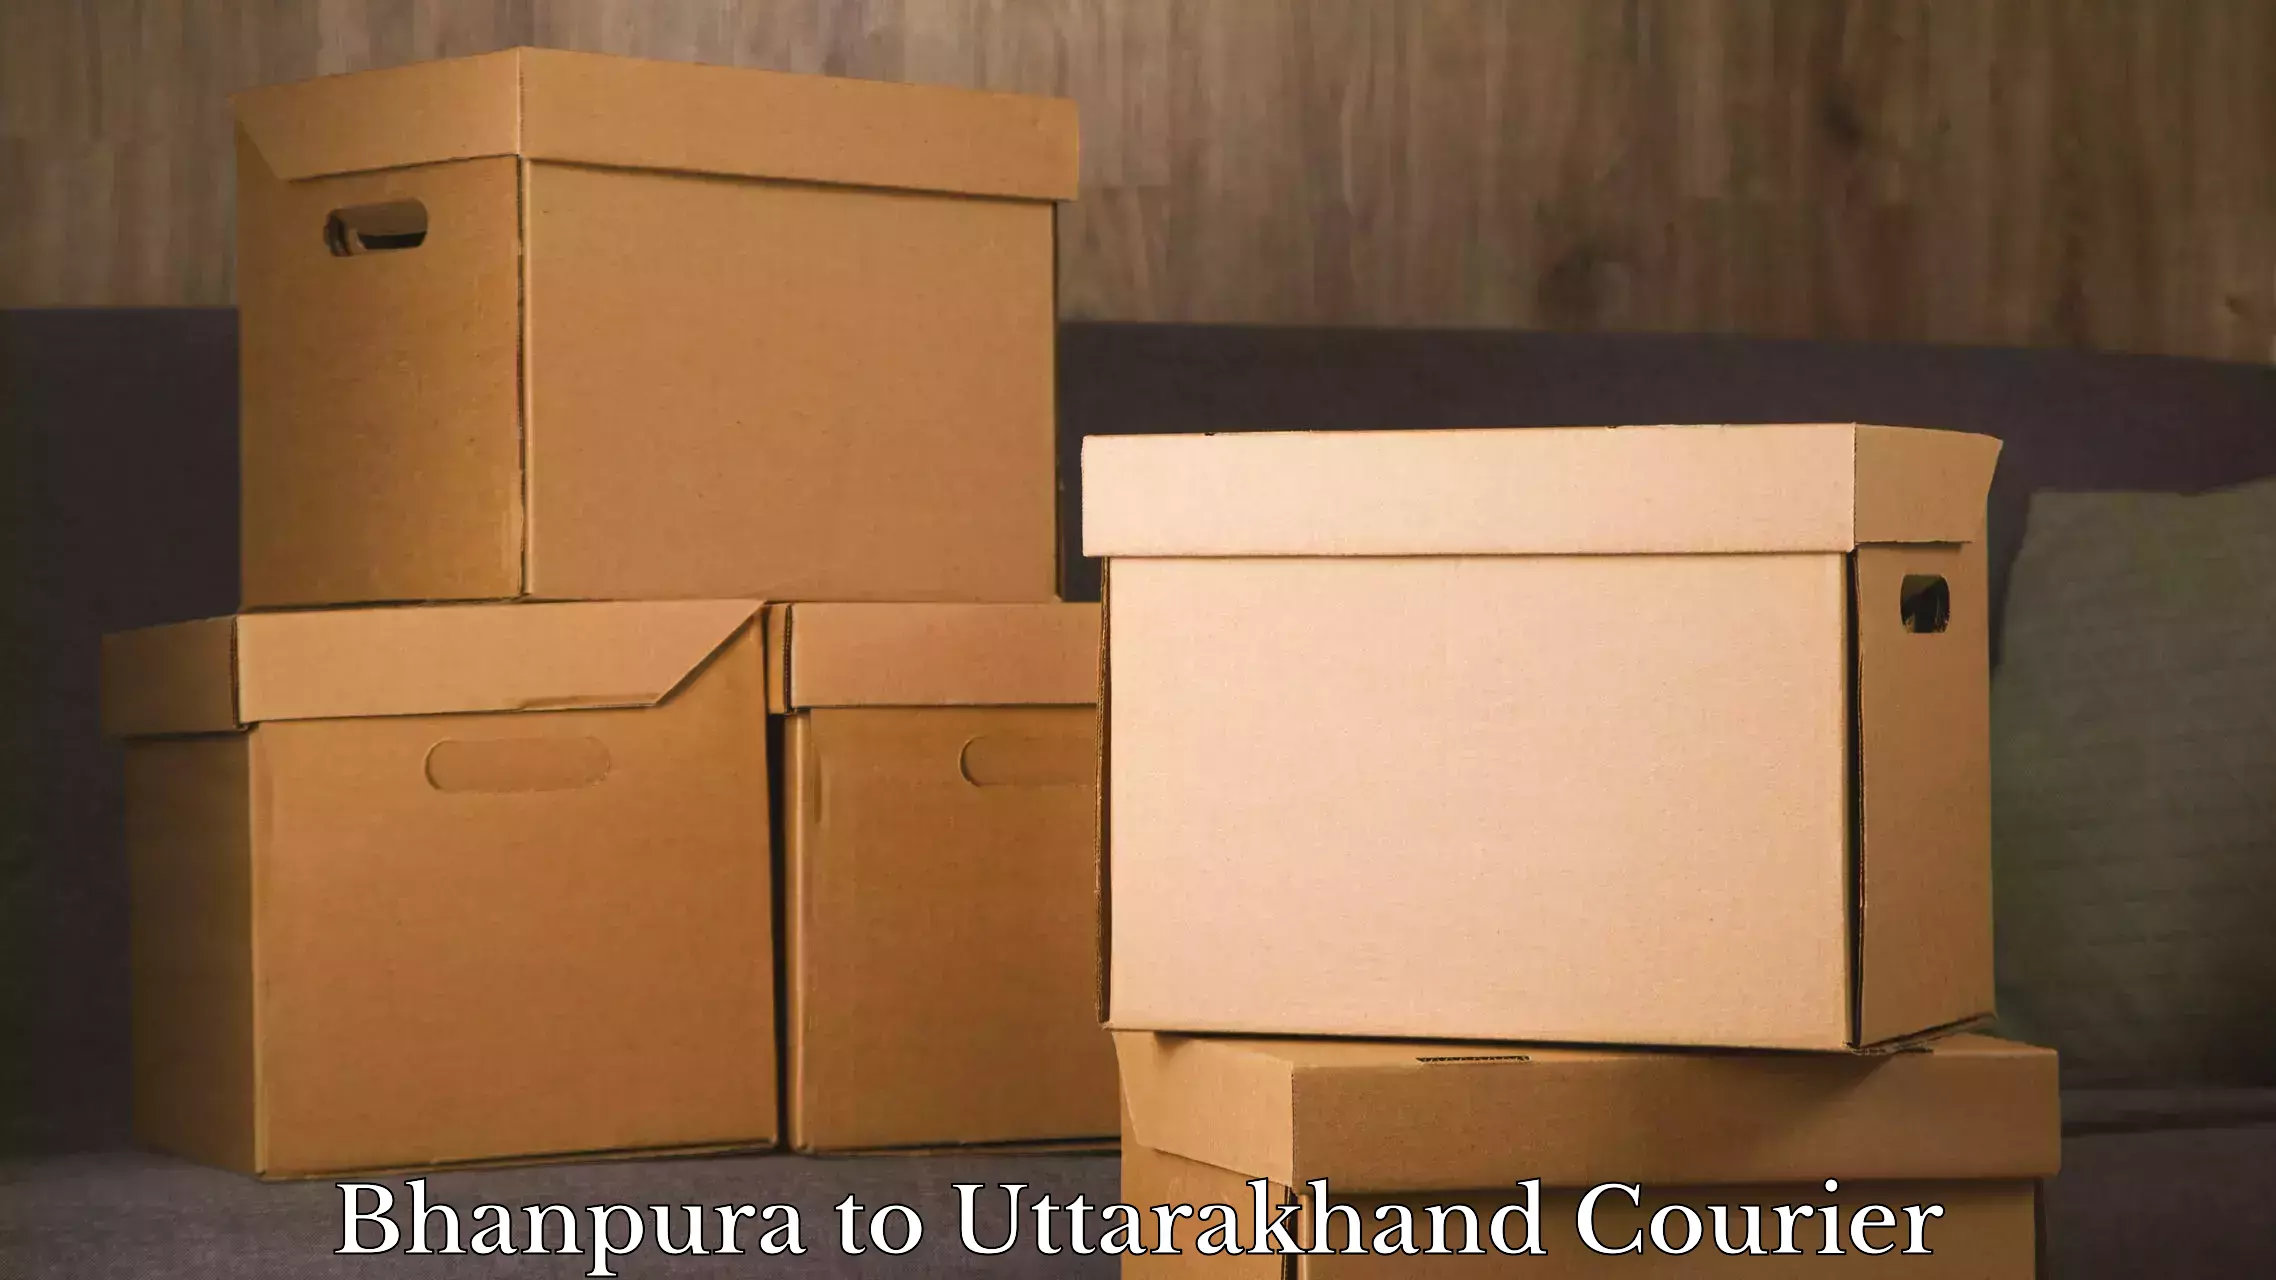 Professional baggage transport in Bhanpura to Mussoorie